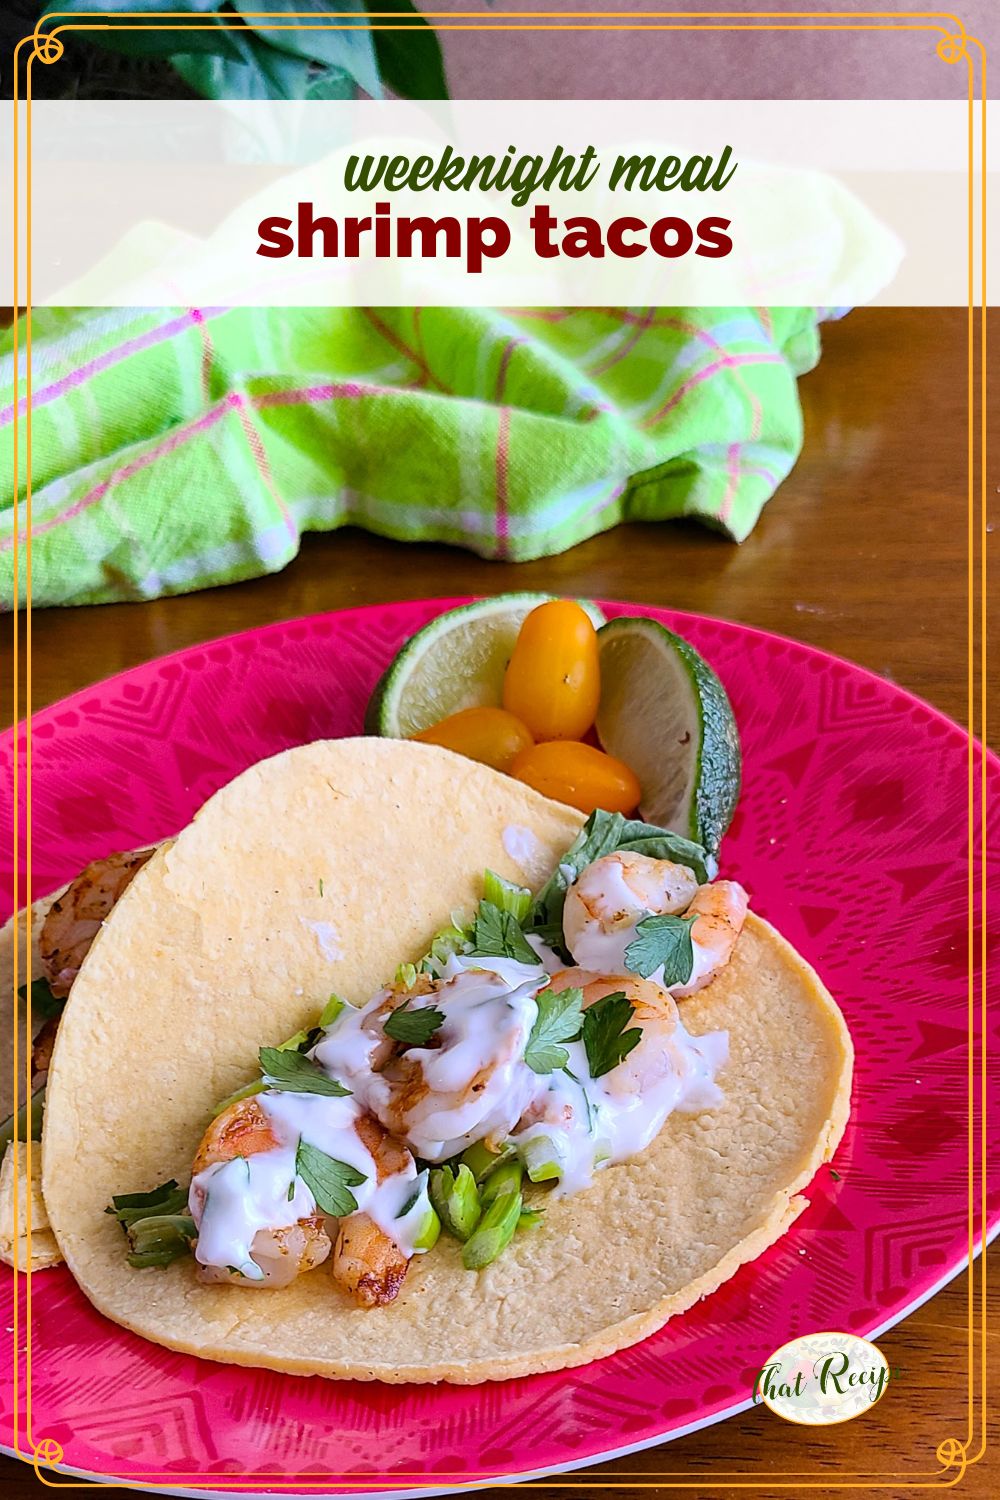 shrimp tacos on a plate with text overlay "weeknight fast shrimp tacos"